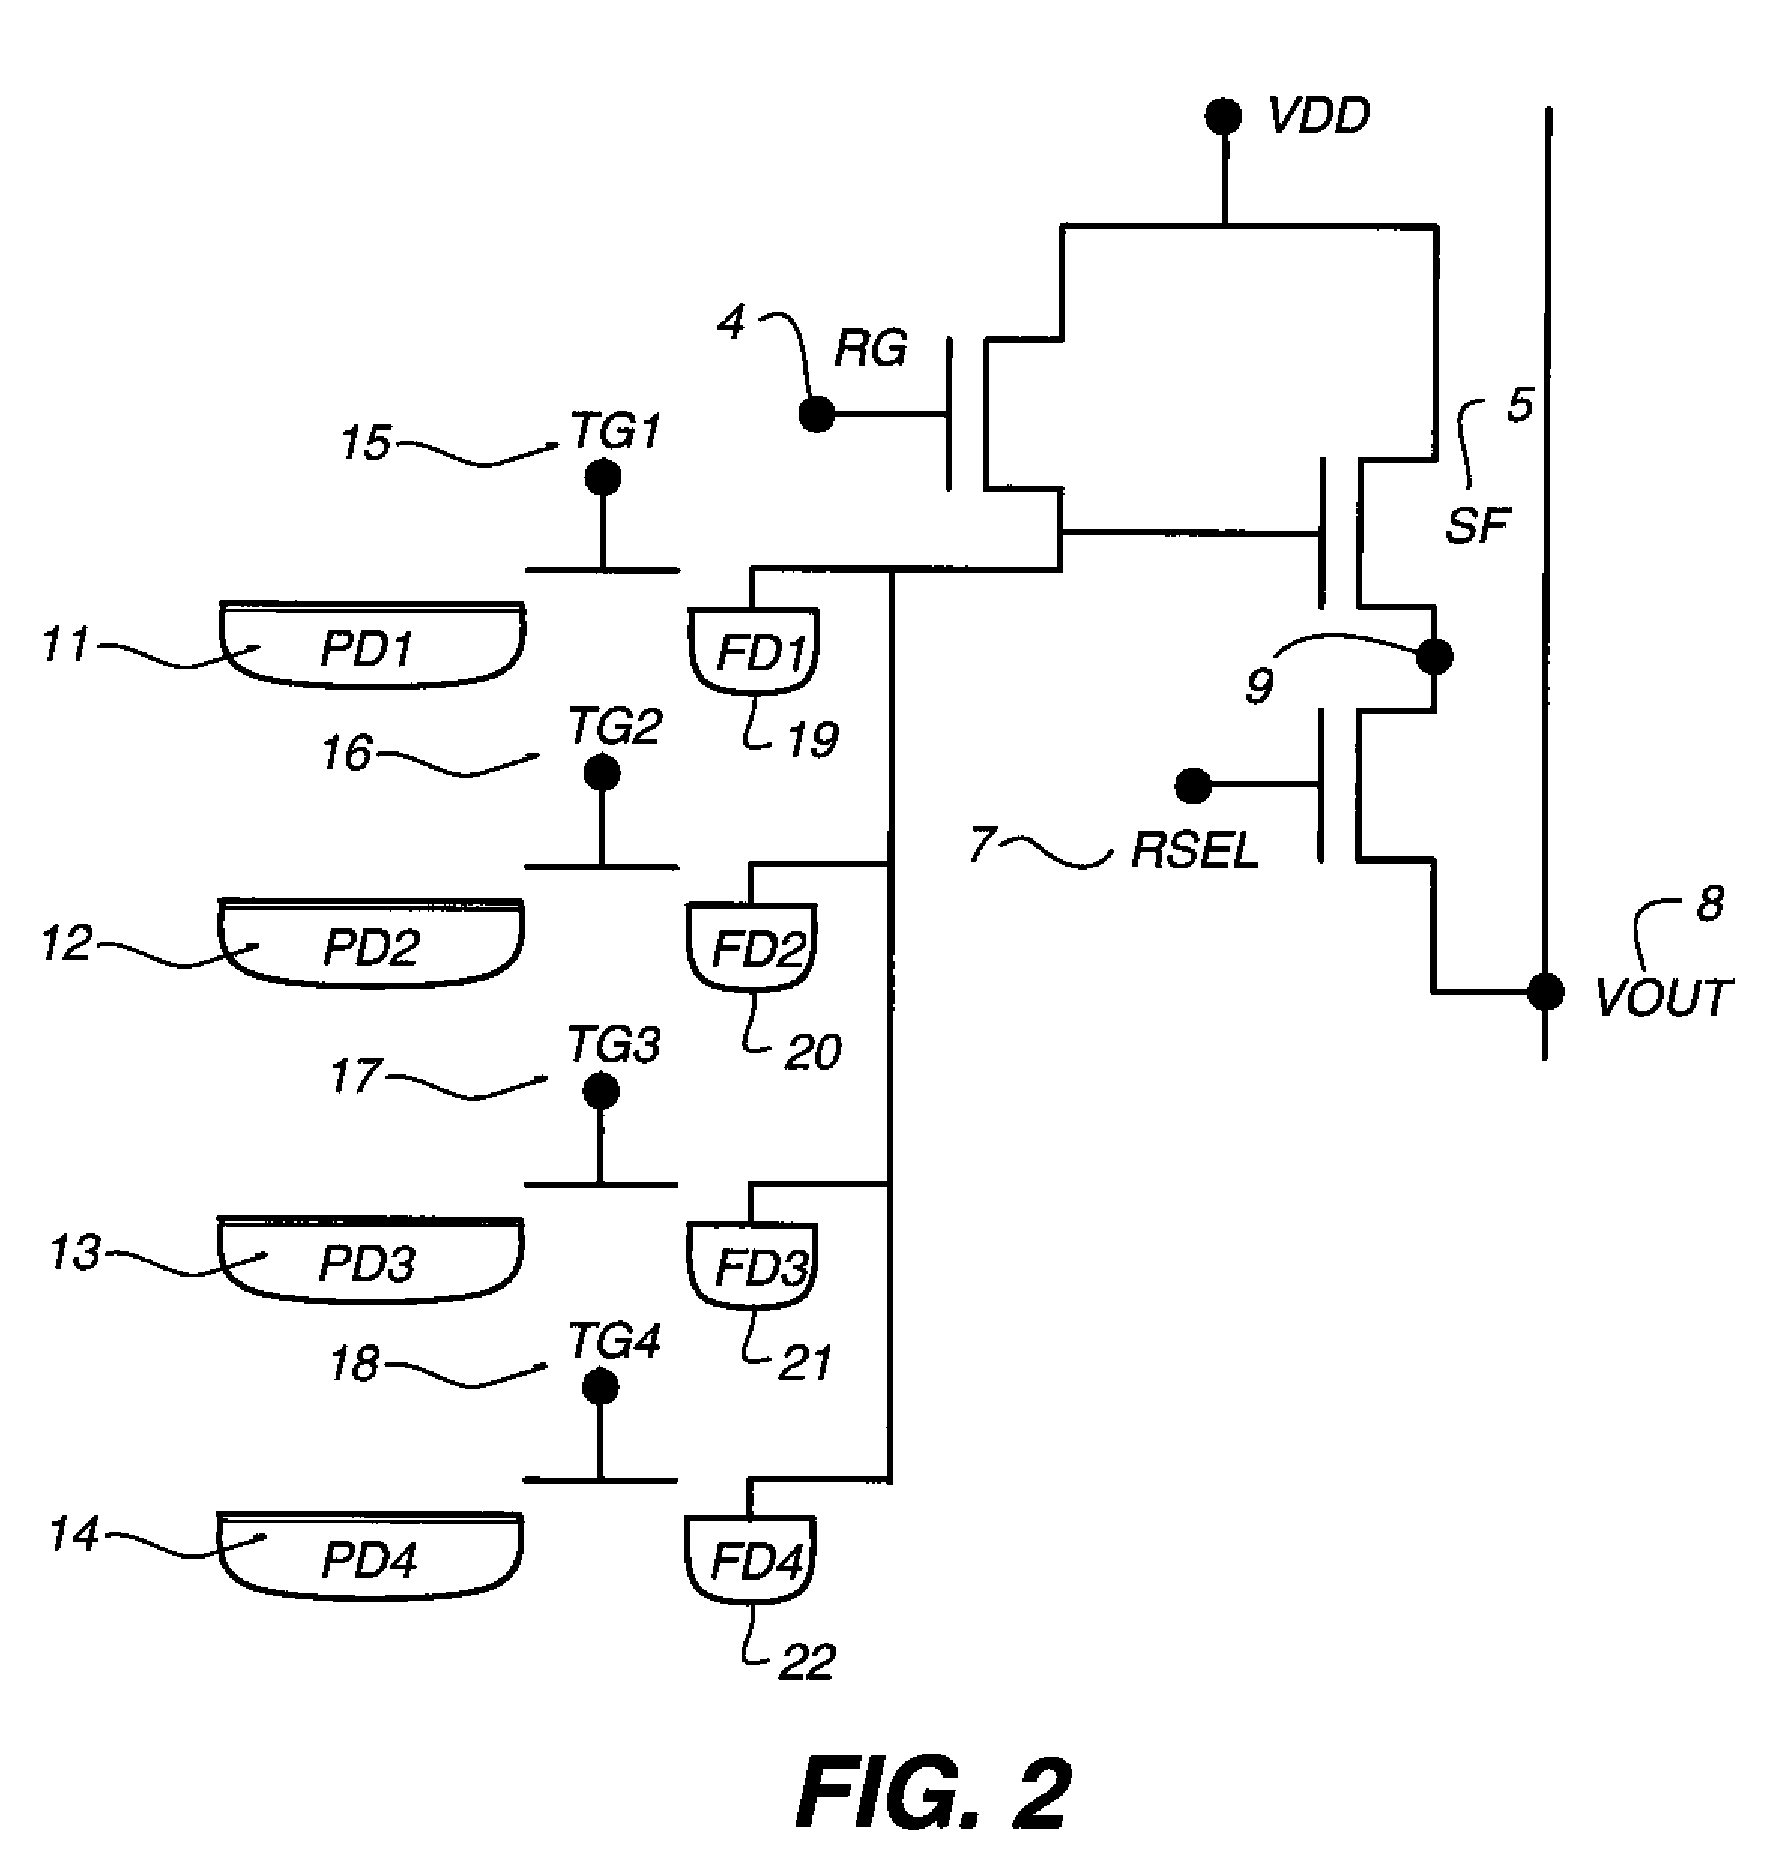 High gain read circuit for 3D integrated pixel